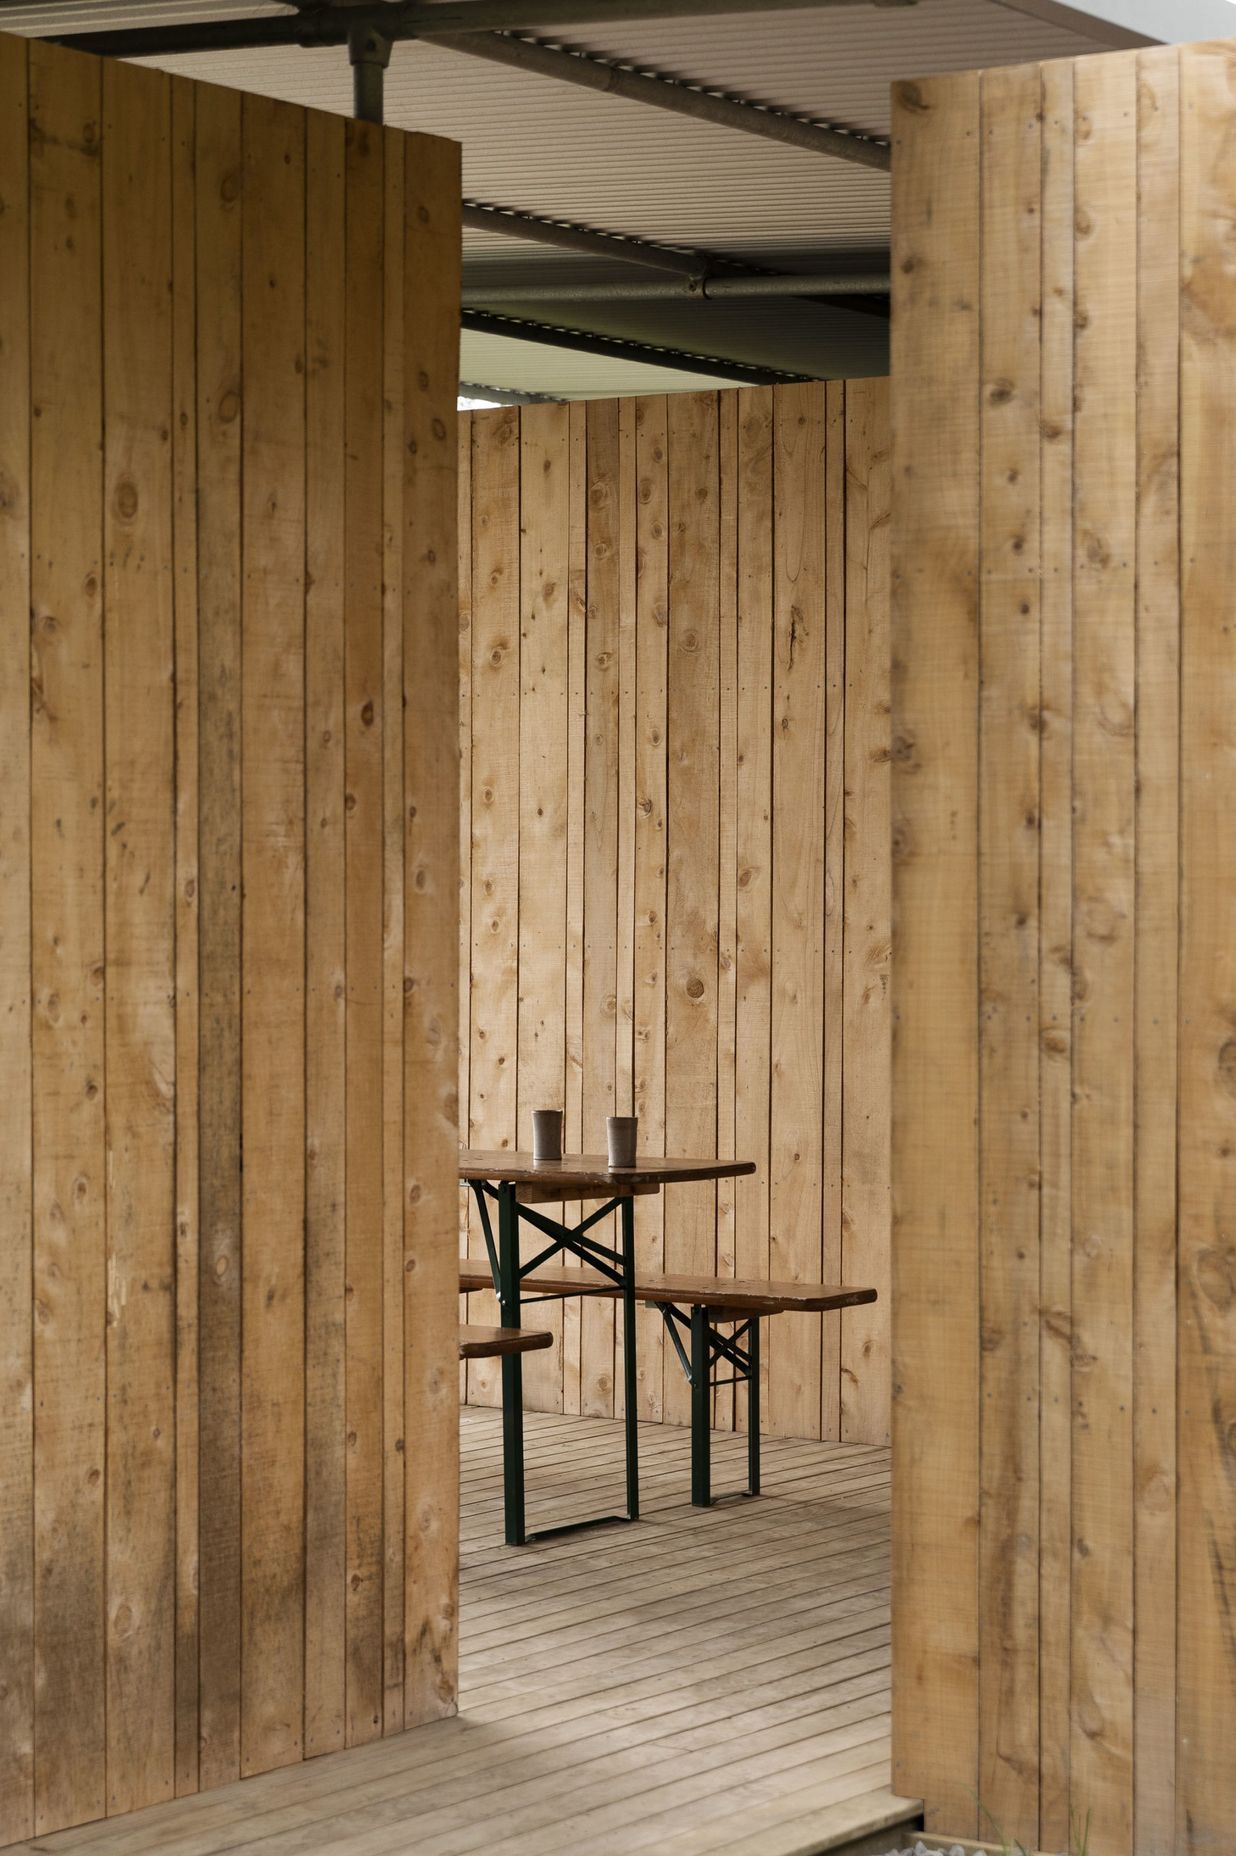 Macrocarpa is a locally sourced timber that creates a warm and textural cladding.